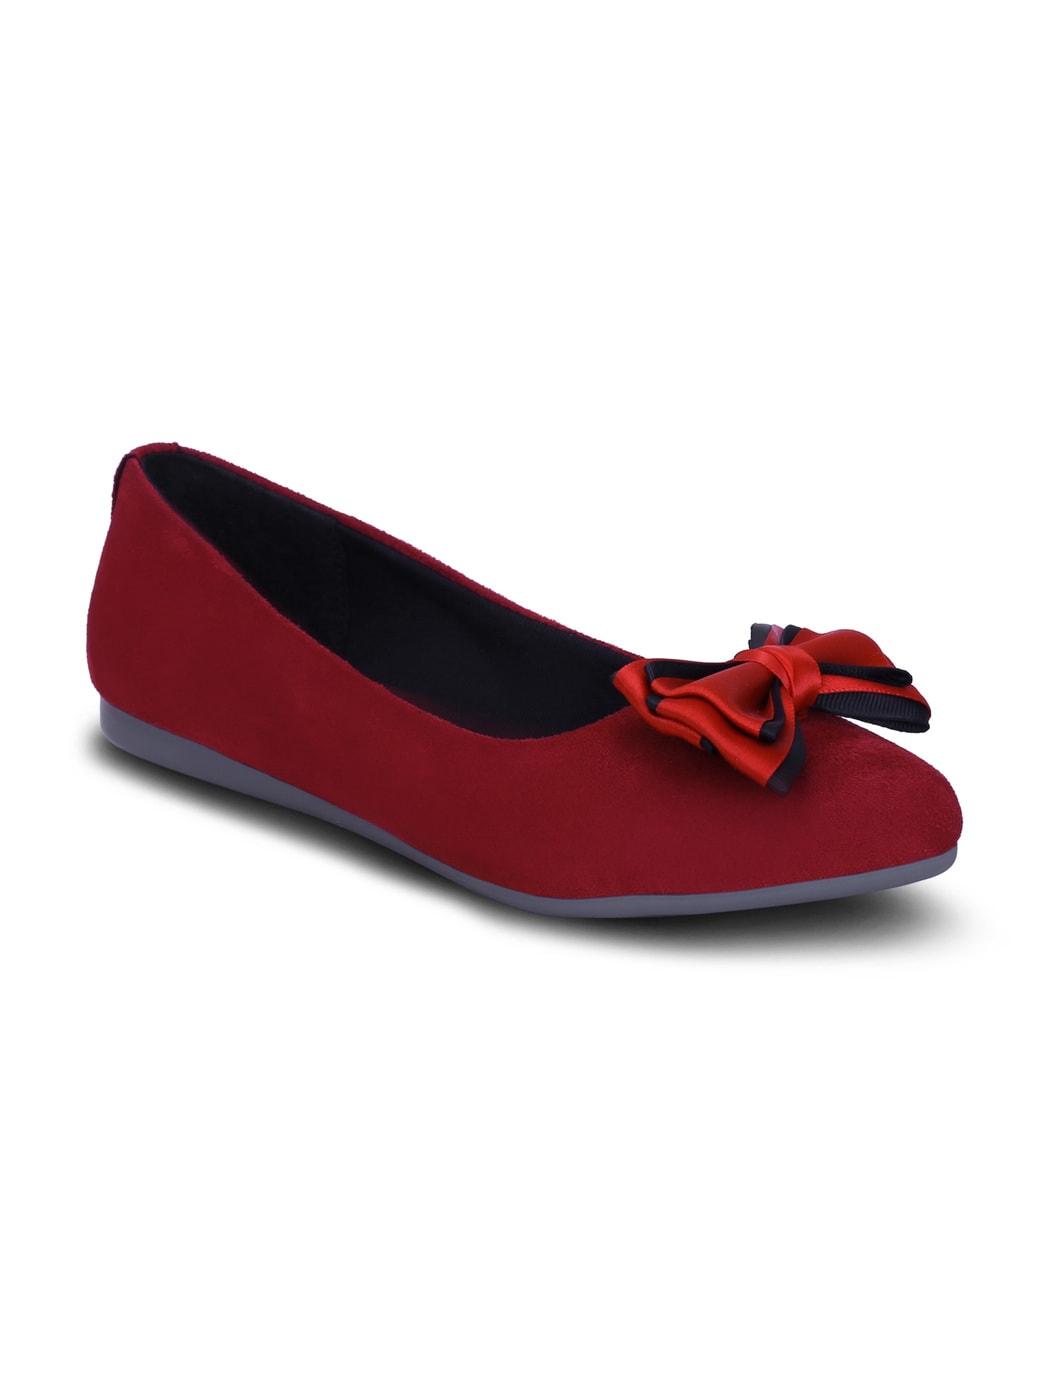 Buy Maroon Flat Shoes for Women by Get 